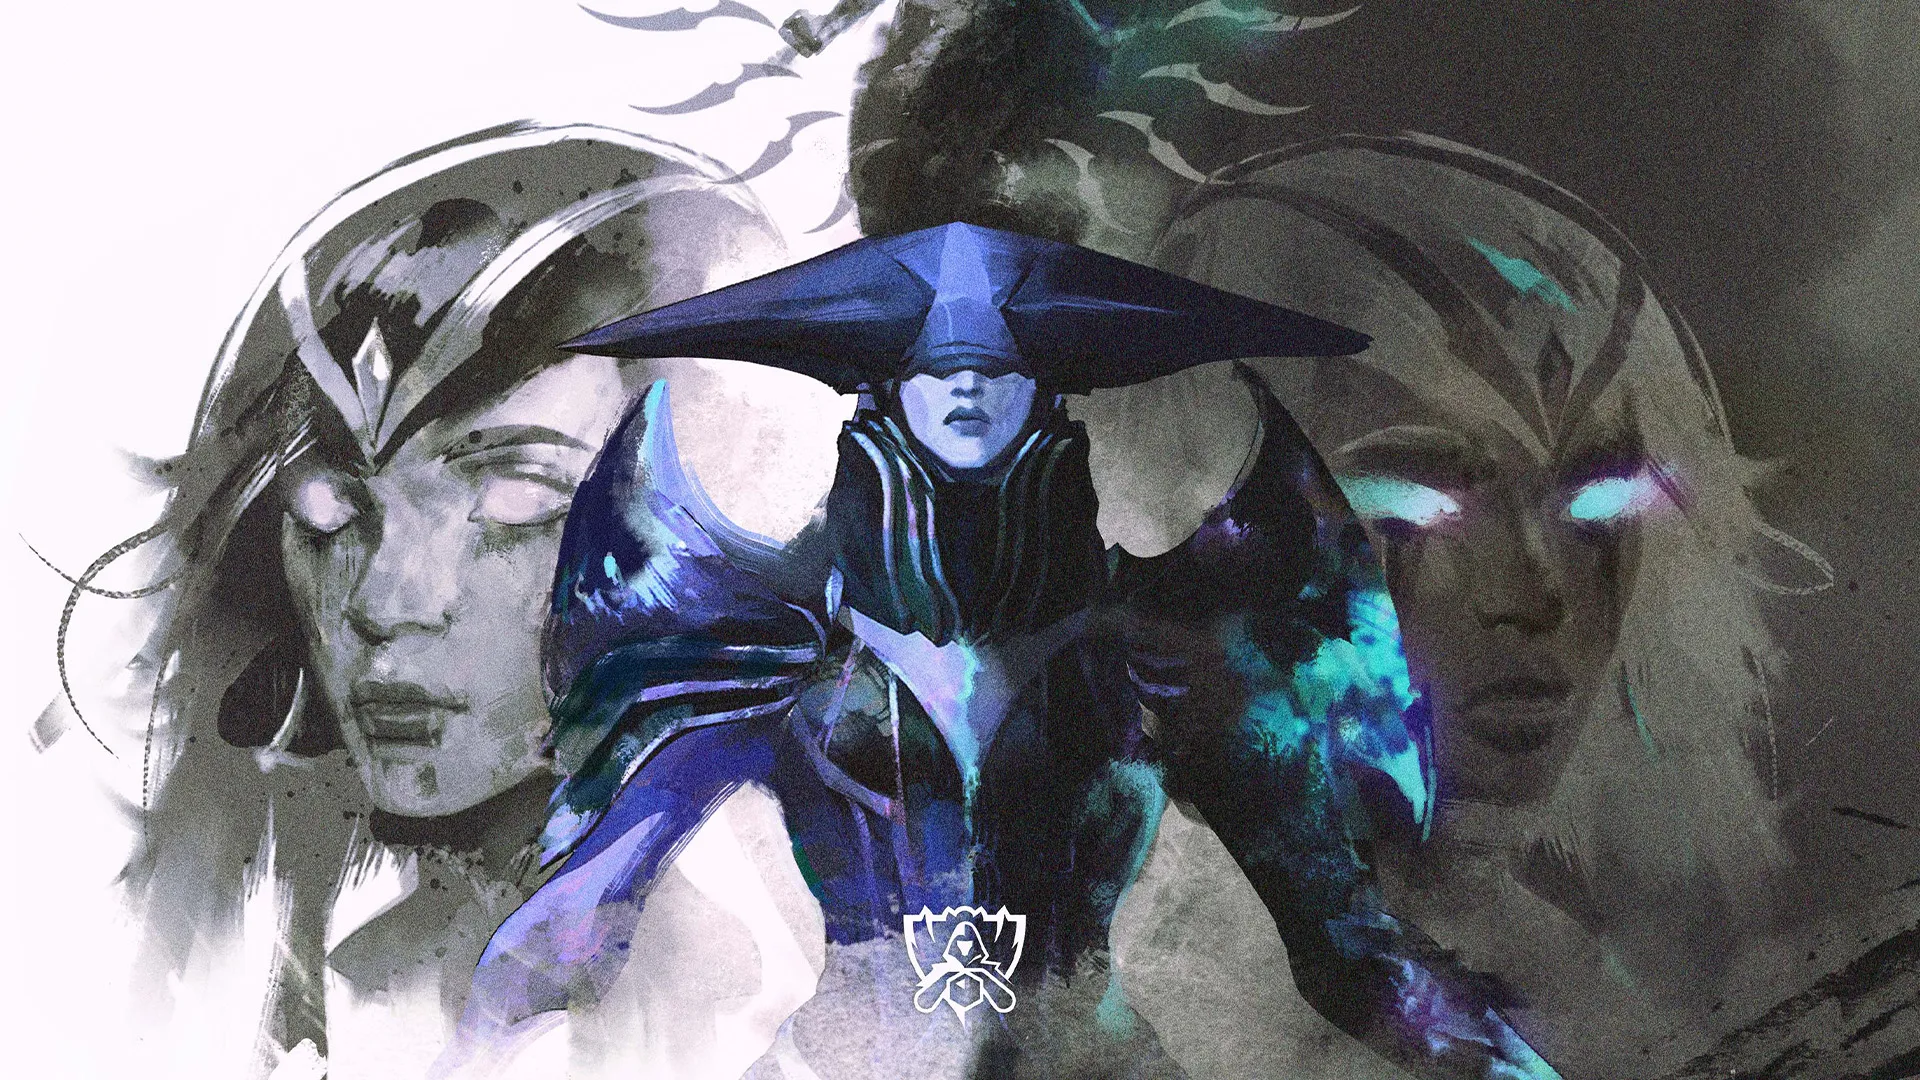 An image of Lissandra in League of Legends